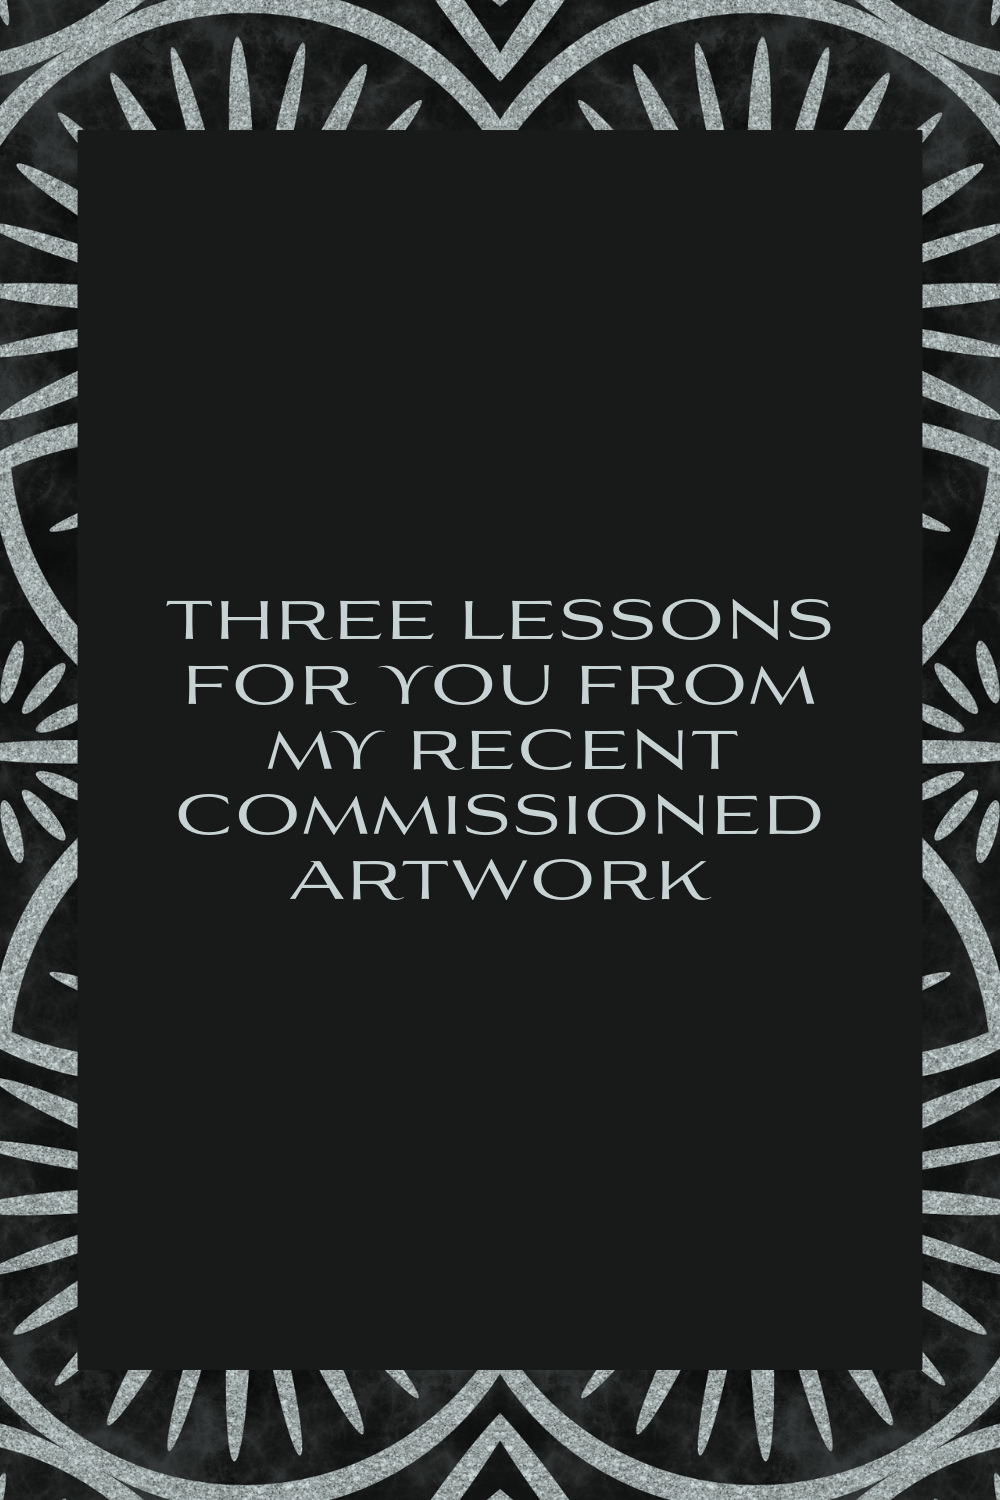 You are currently viewing Three lessons for you from my recent commissioned artwork